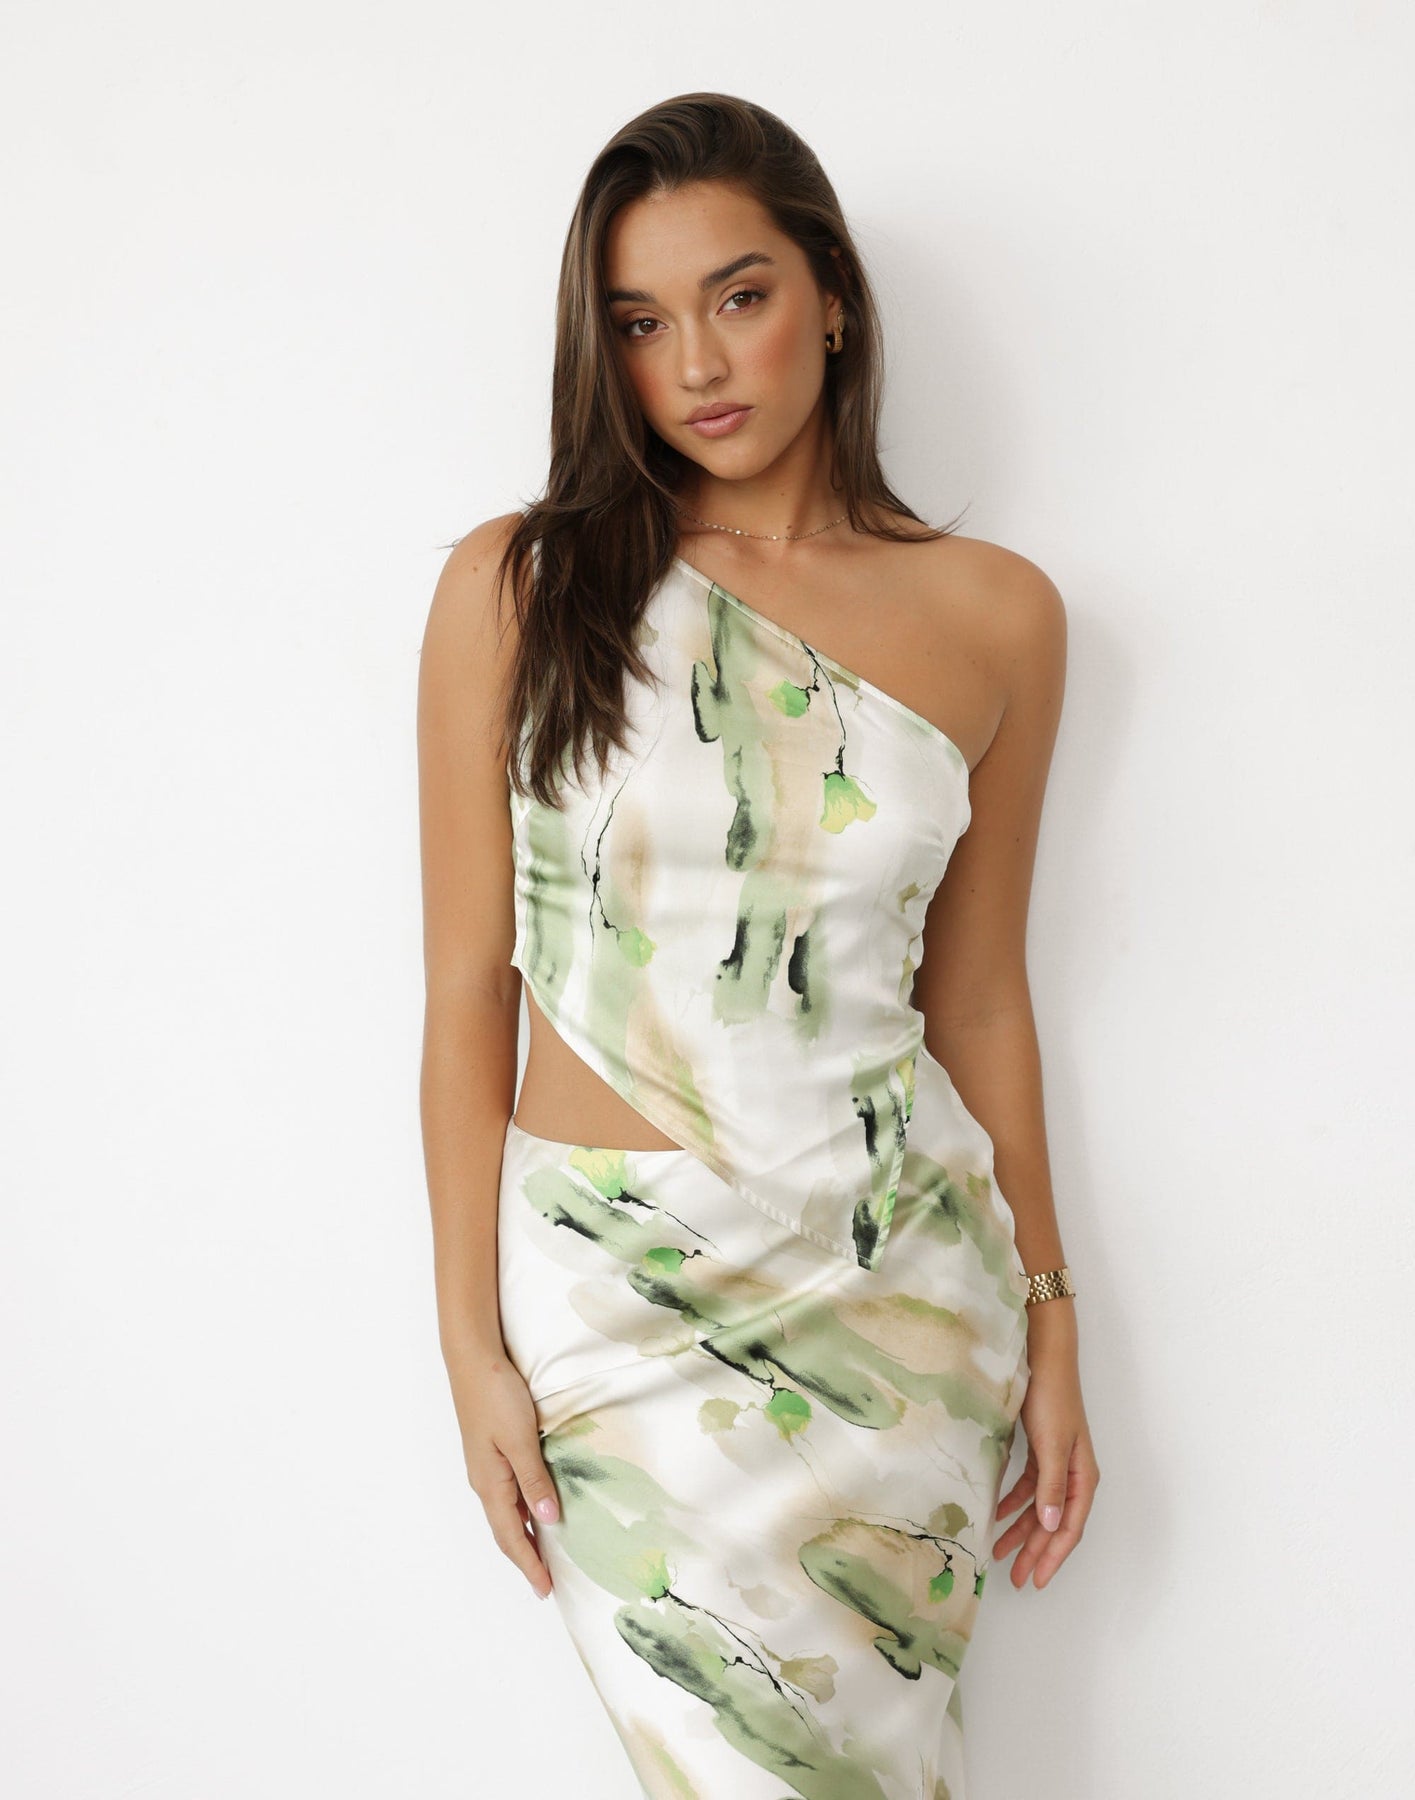 Collective Tops - Adoette One Shoulder Top (Water Lily)
                Add to wishlist third image